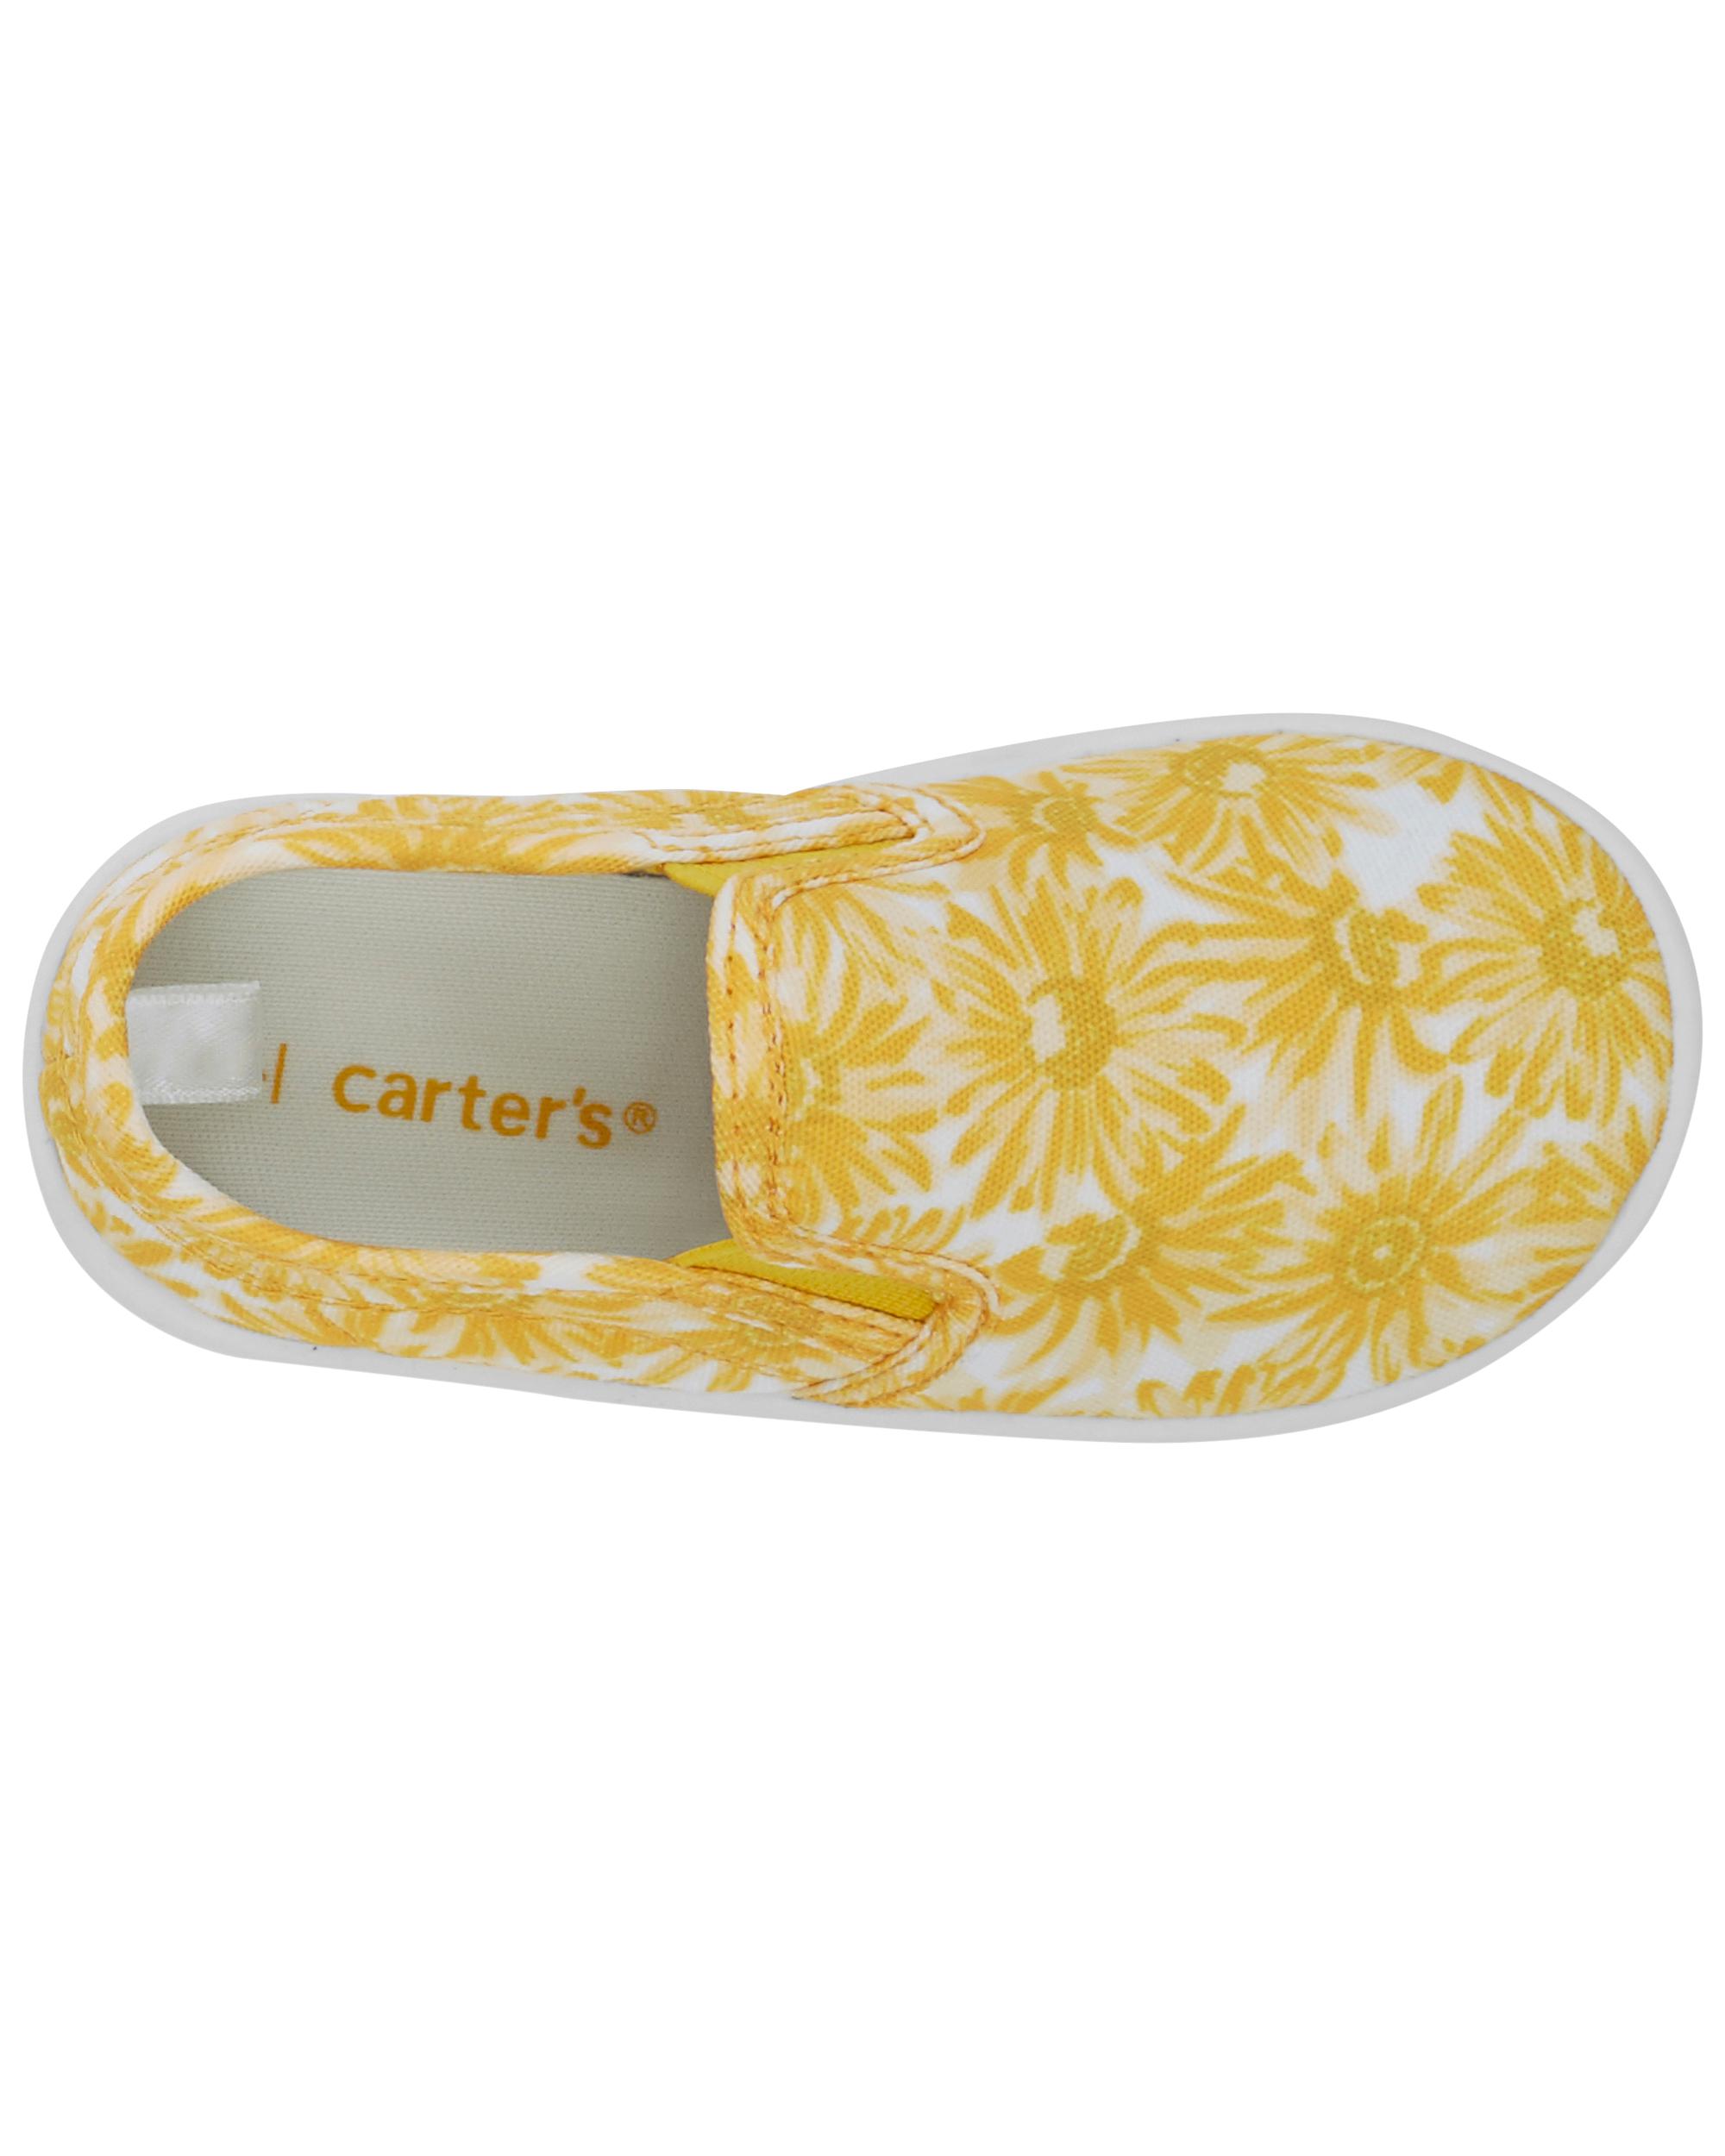 Toddler Sunflower Casual Sneakers